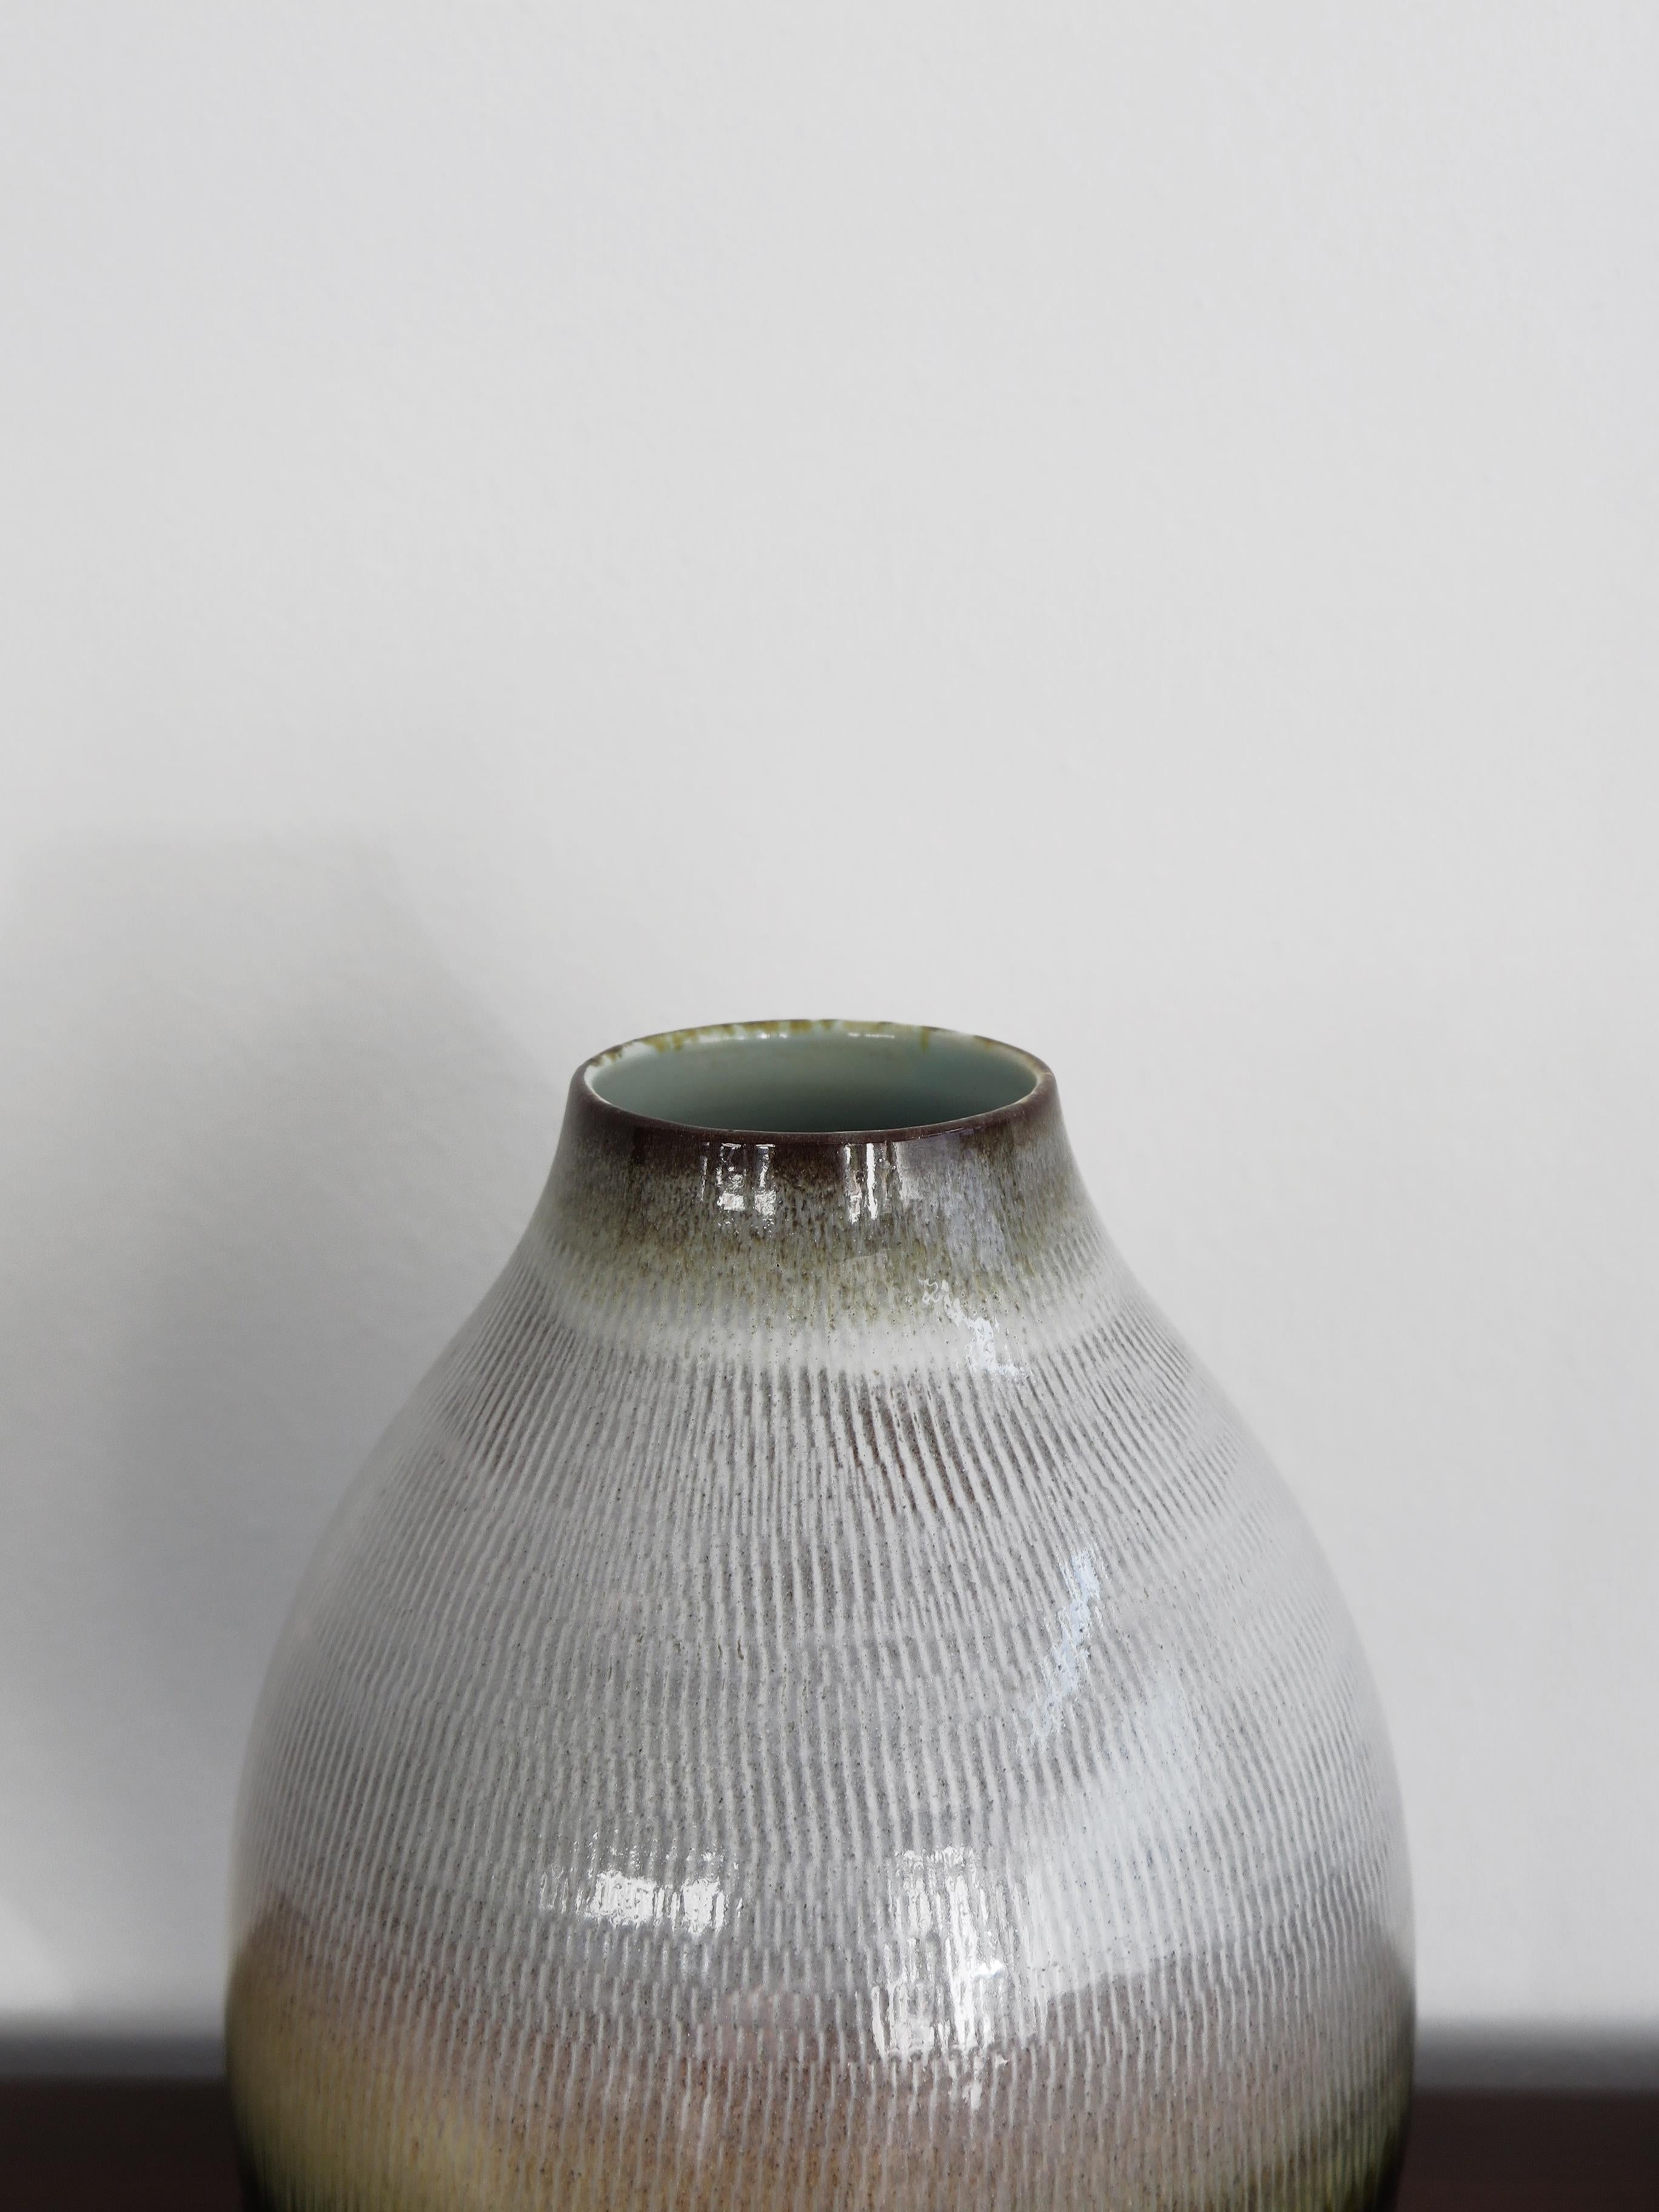 Italian contemporary ceramic vase designed and produced by Amaaro, made by hand and enameled with oxides and crystallines, the work becomes a precious and sculptural object, engraved signature under the base,
production Italy 2022.